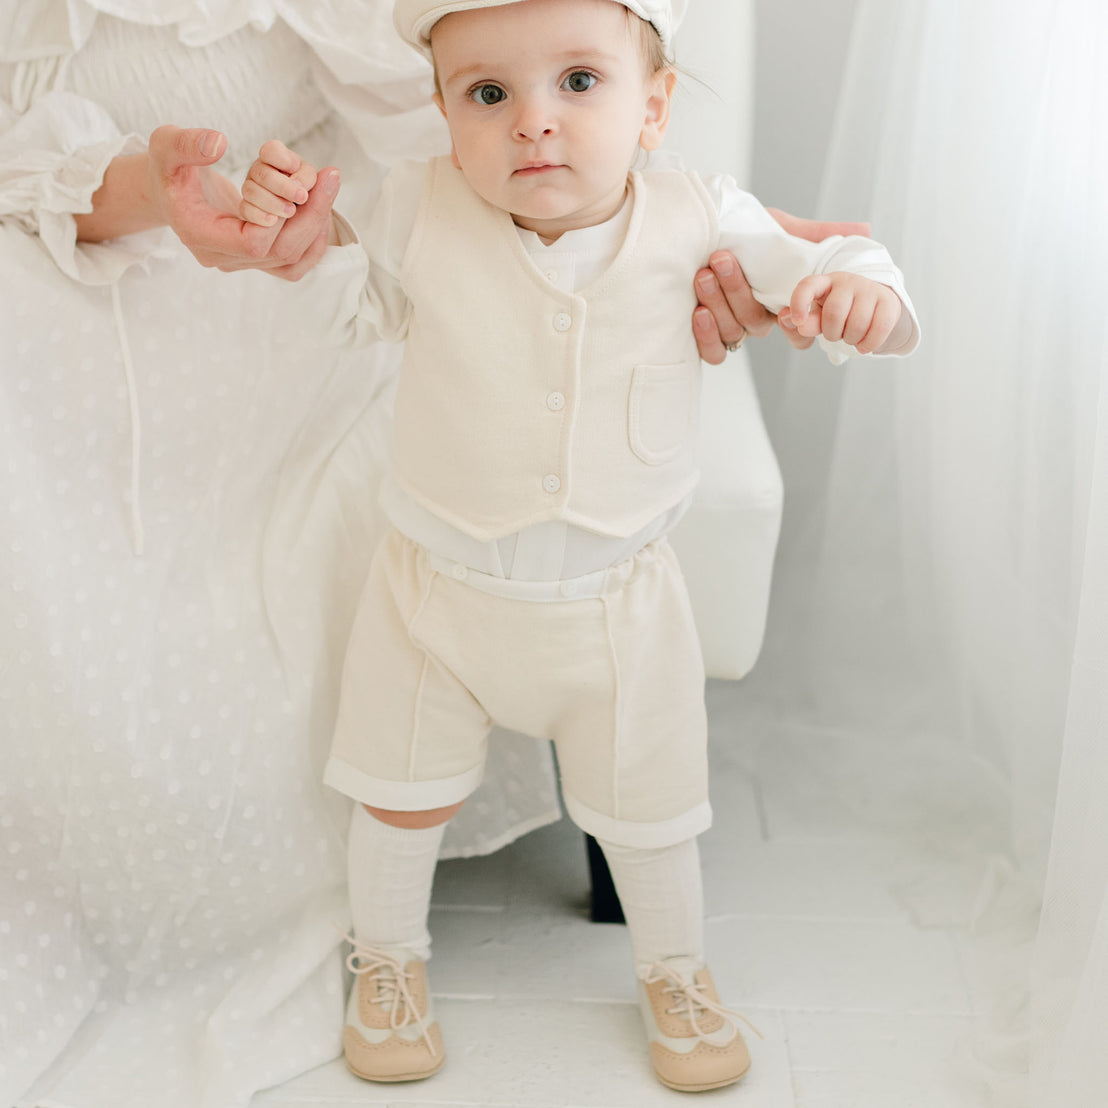 Baby boy standing up with the help of his mother. He is wearing the Braden Vest Shorts Suit. The vest and pants are made of ivory French Terry Cotton.